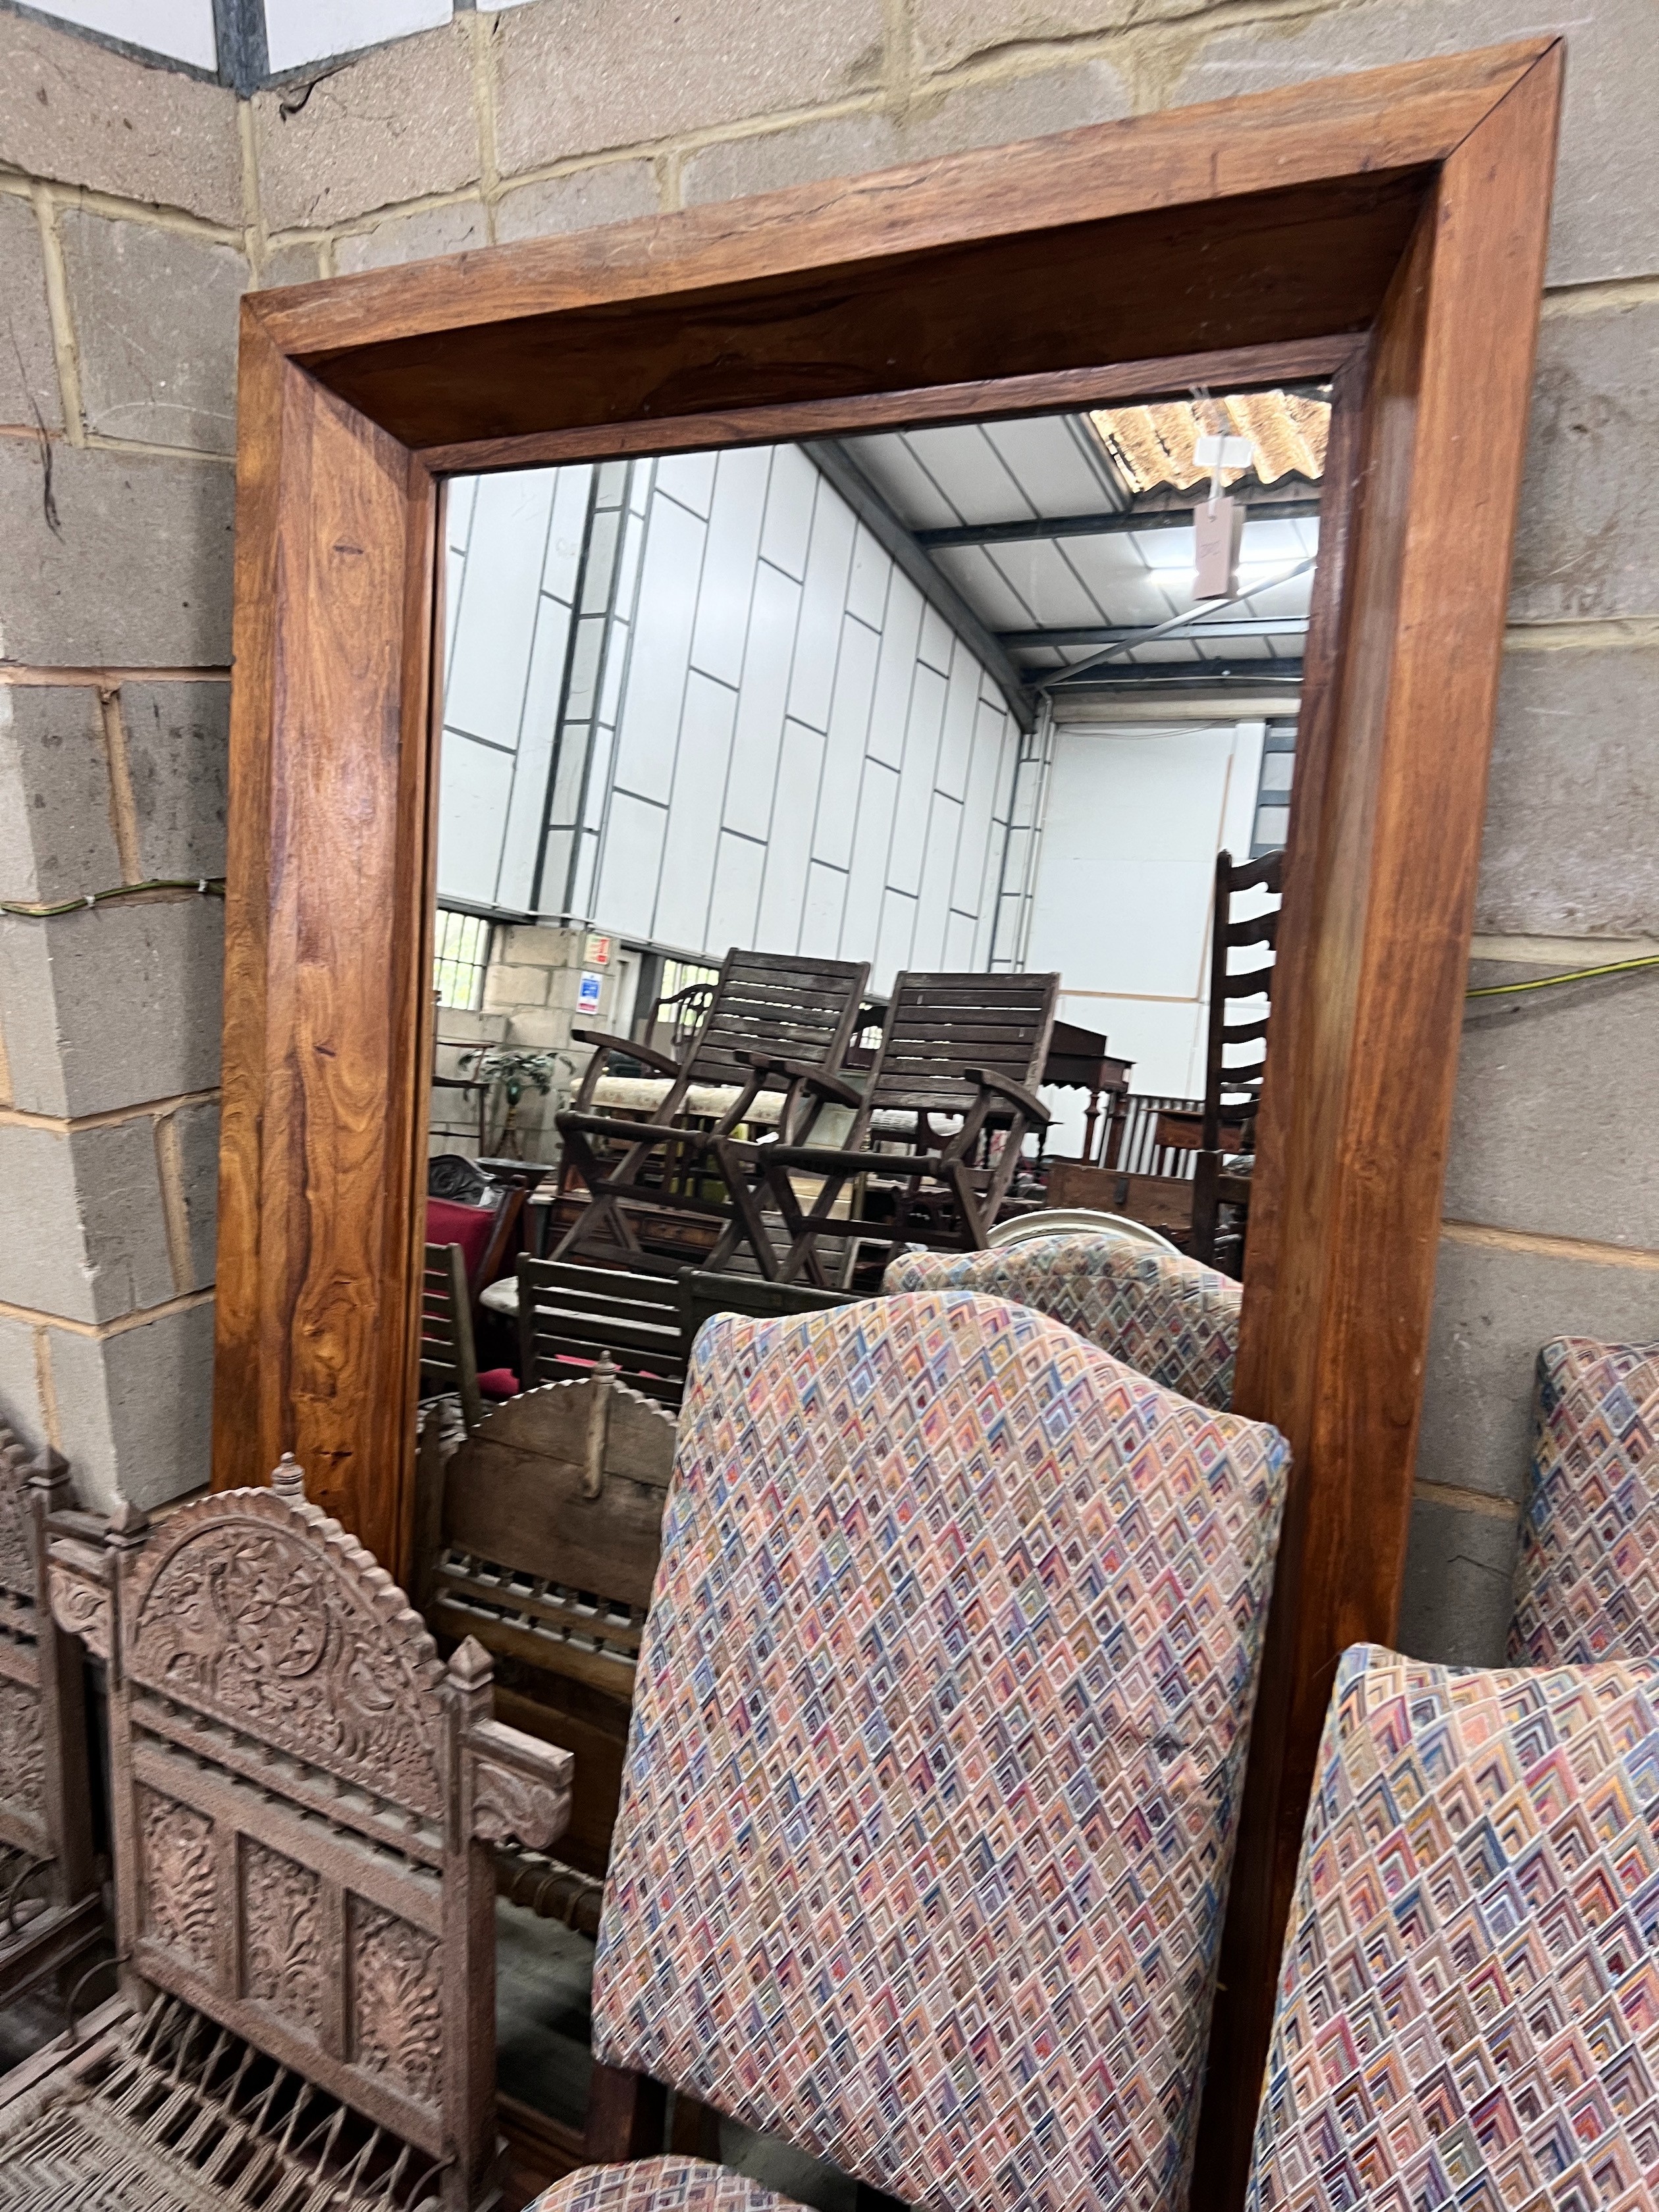 A heavy teak framed mirror, width 120cm, height 200cm *Please note the sale commences at 9am.